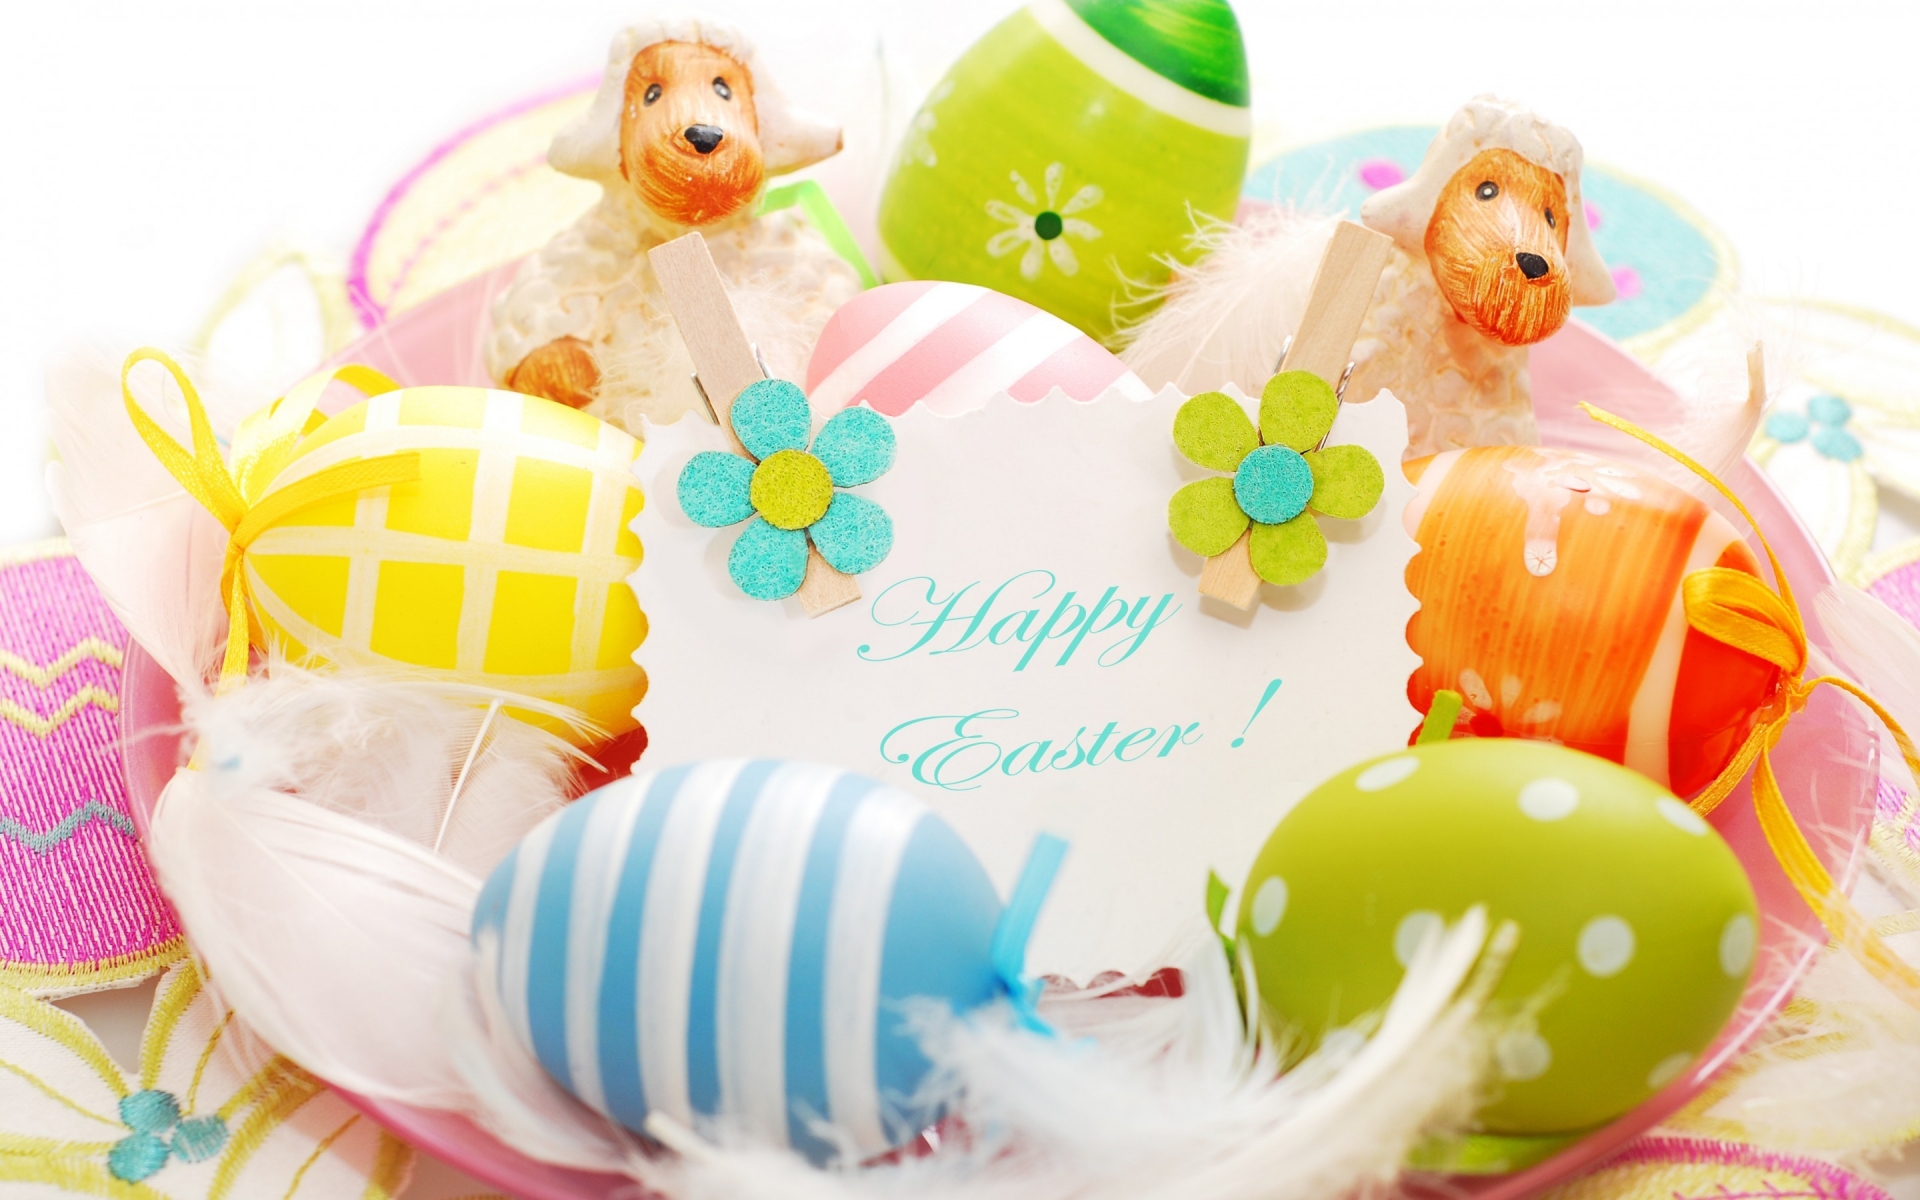 2014 Happy Easter Decorations for 1920 x 1200 widescreen resolution